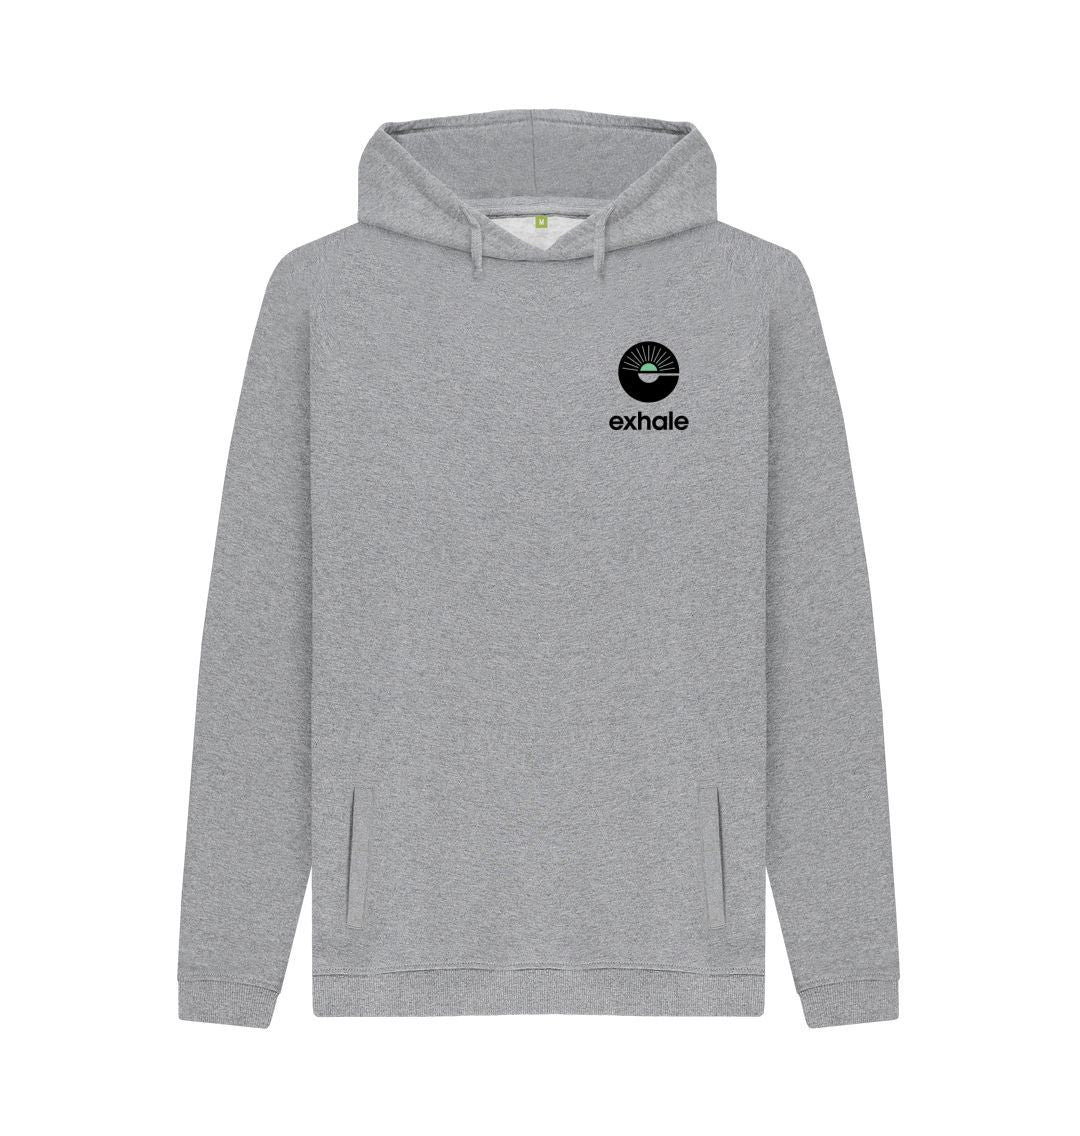 Grey Exhale hoodie with small logo